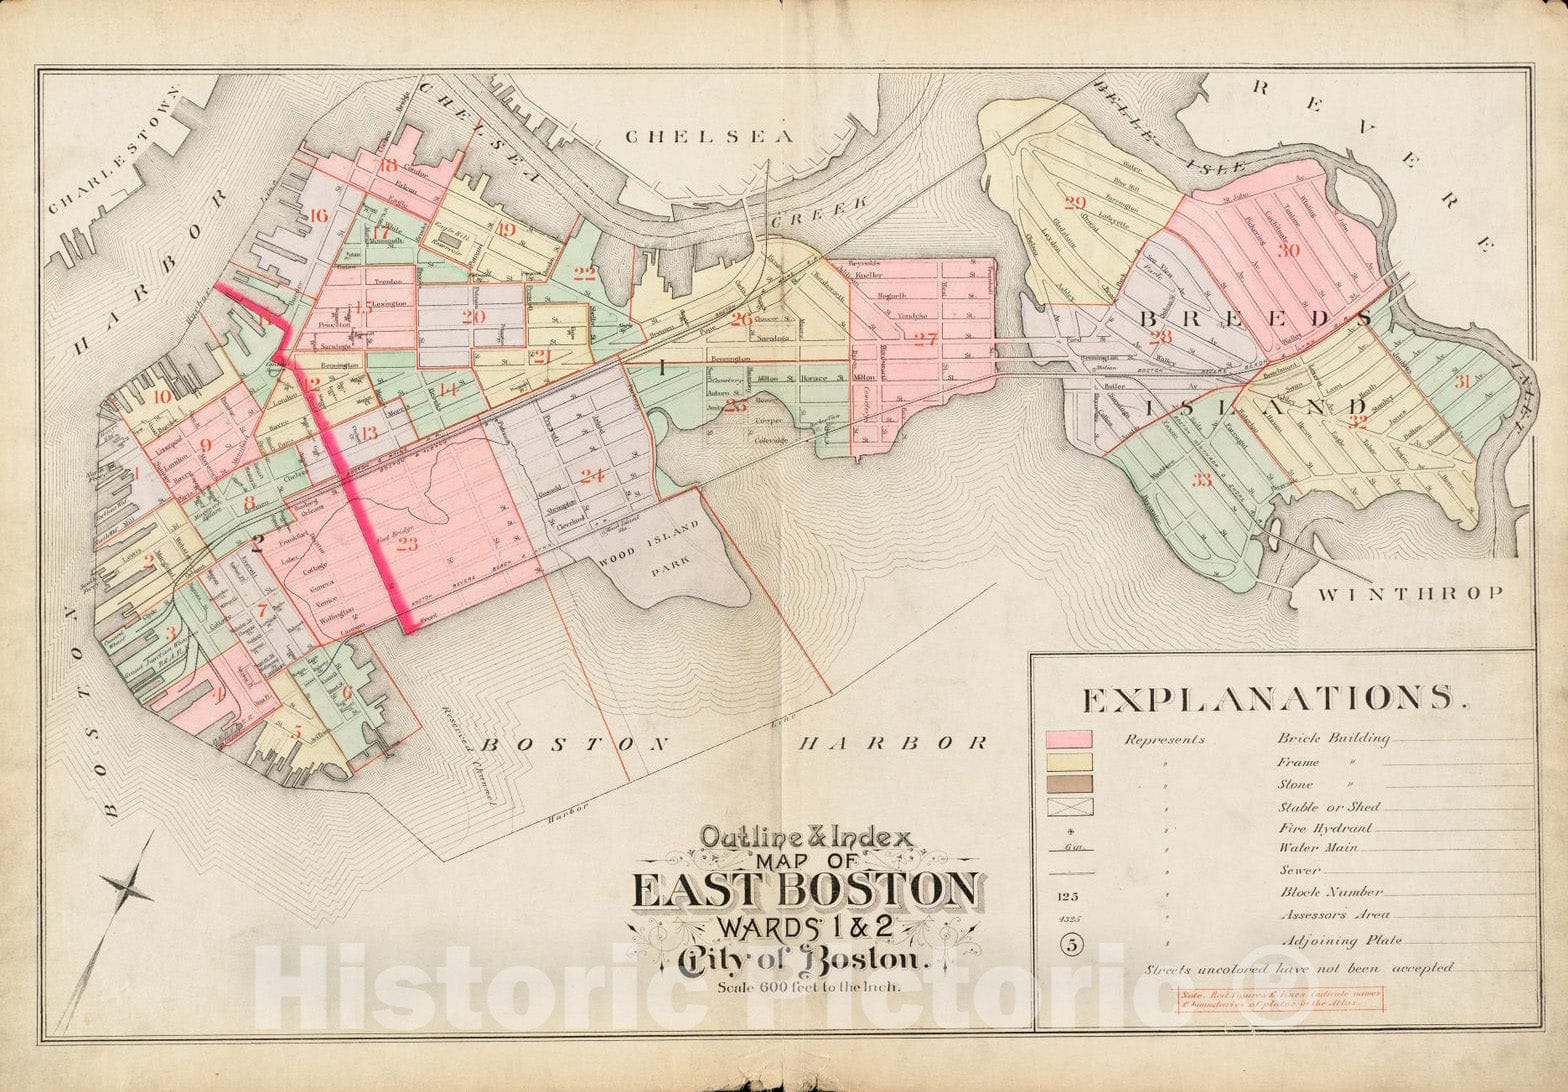 Historical Map, 1892 Outline & index map of East Boston, wards 1 & 2, city of Boston, Vintage Wall Art